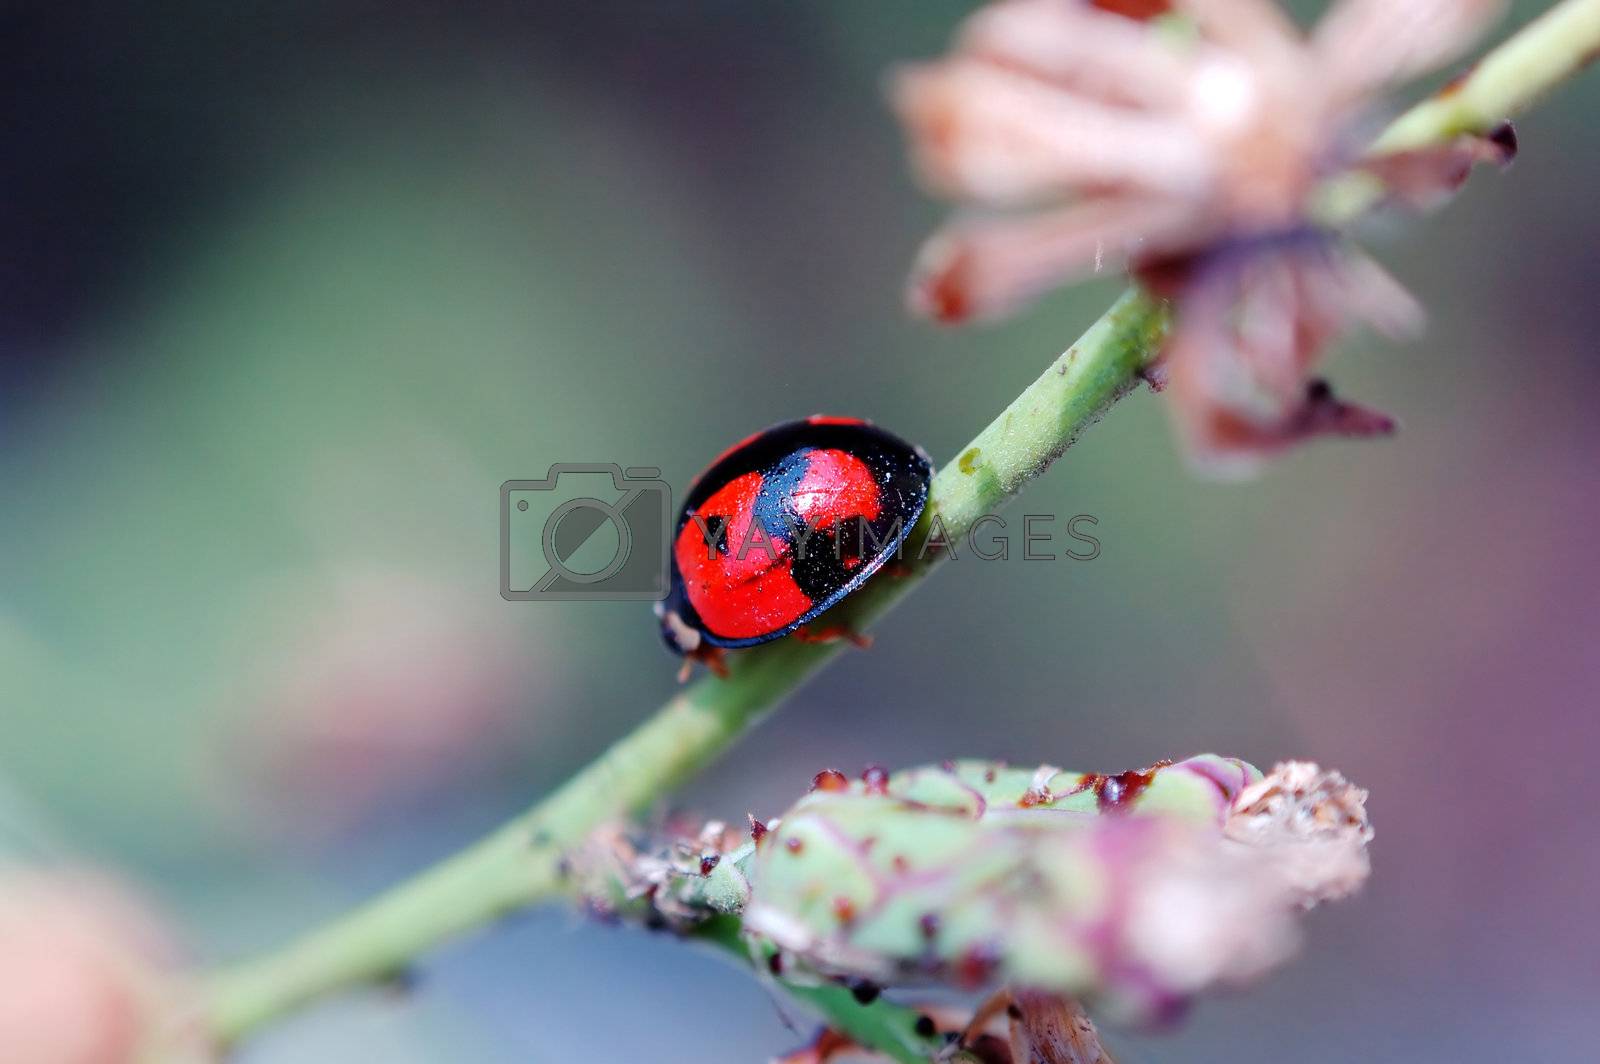 Royalty free image of Ladybird walking on stem of compositae plant by tito